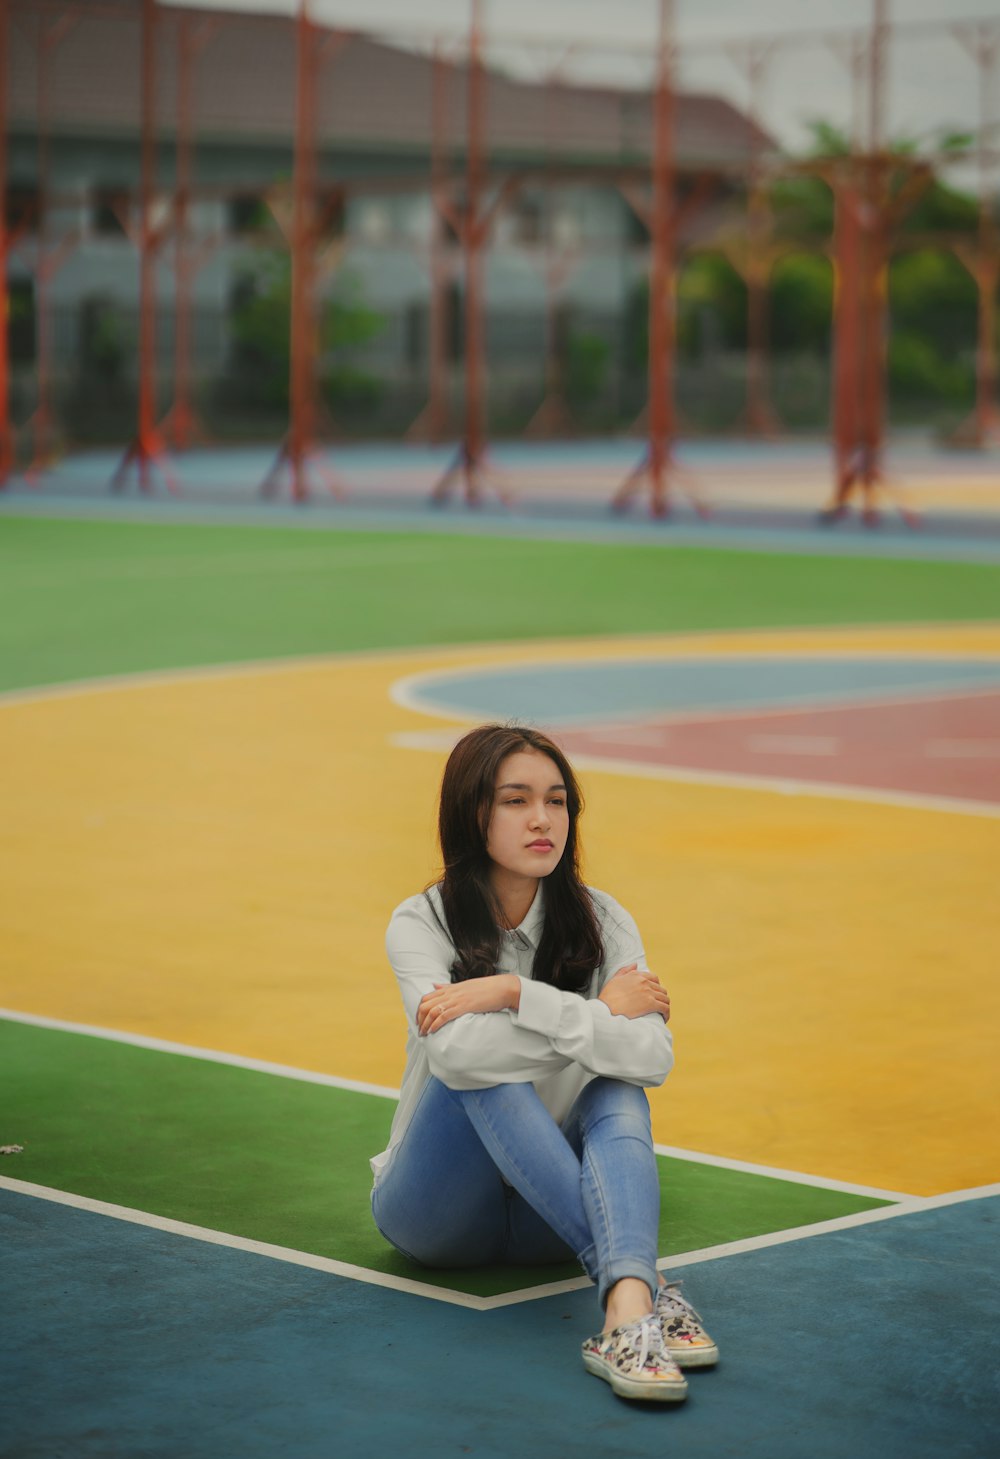 a woman sitting on a basketball court with her arms crossed